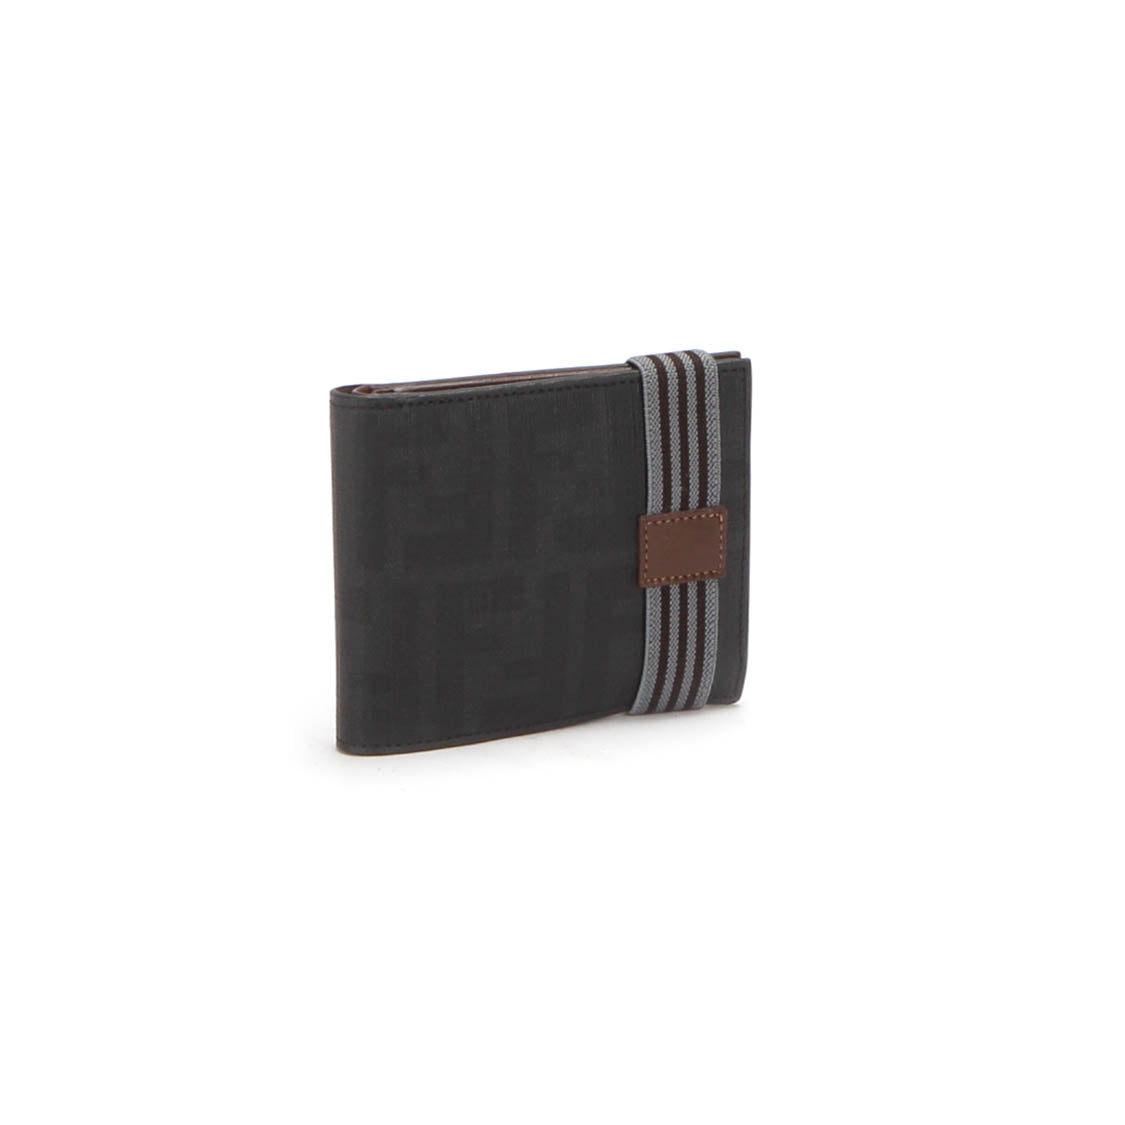 Zucca Small Wallet